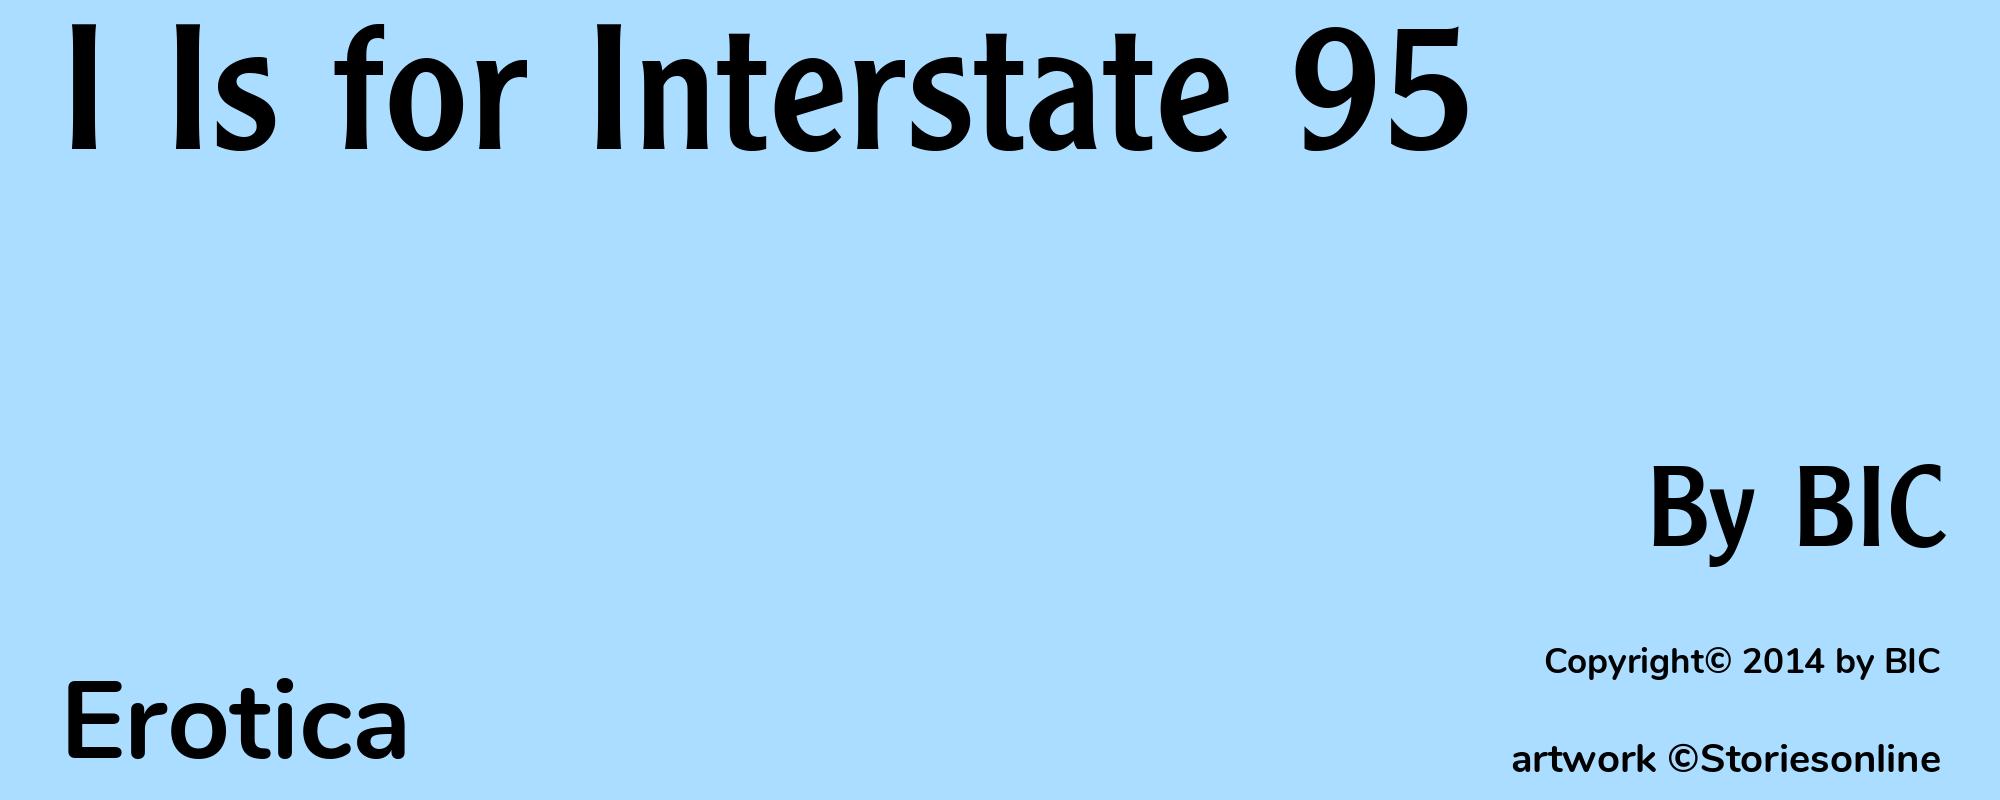 I Is for Interstate 95 - Cover